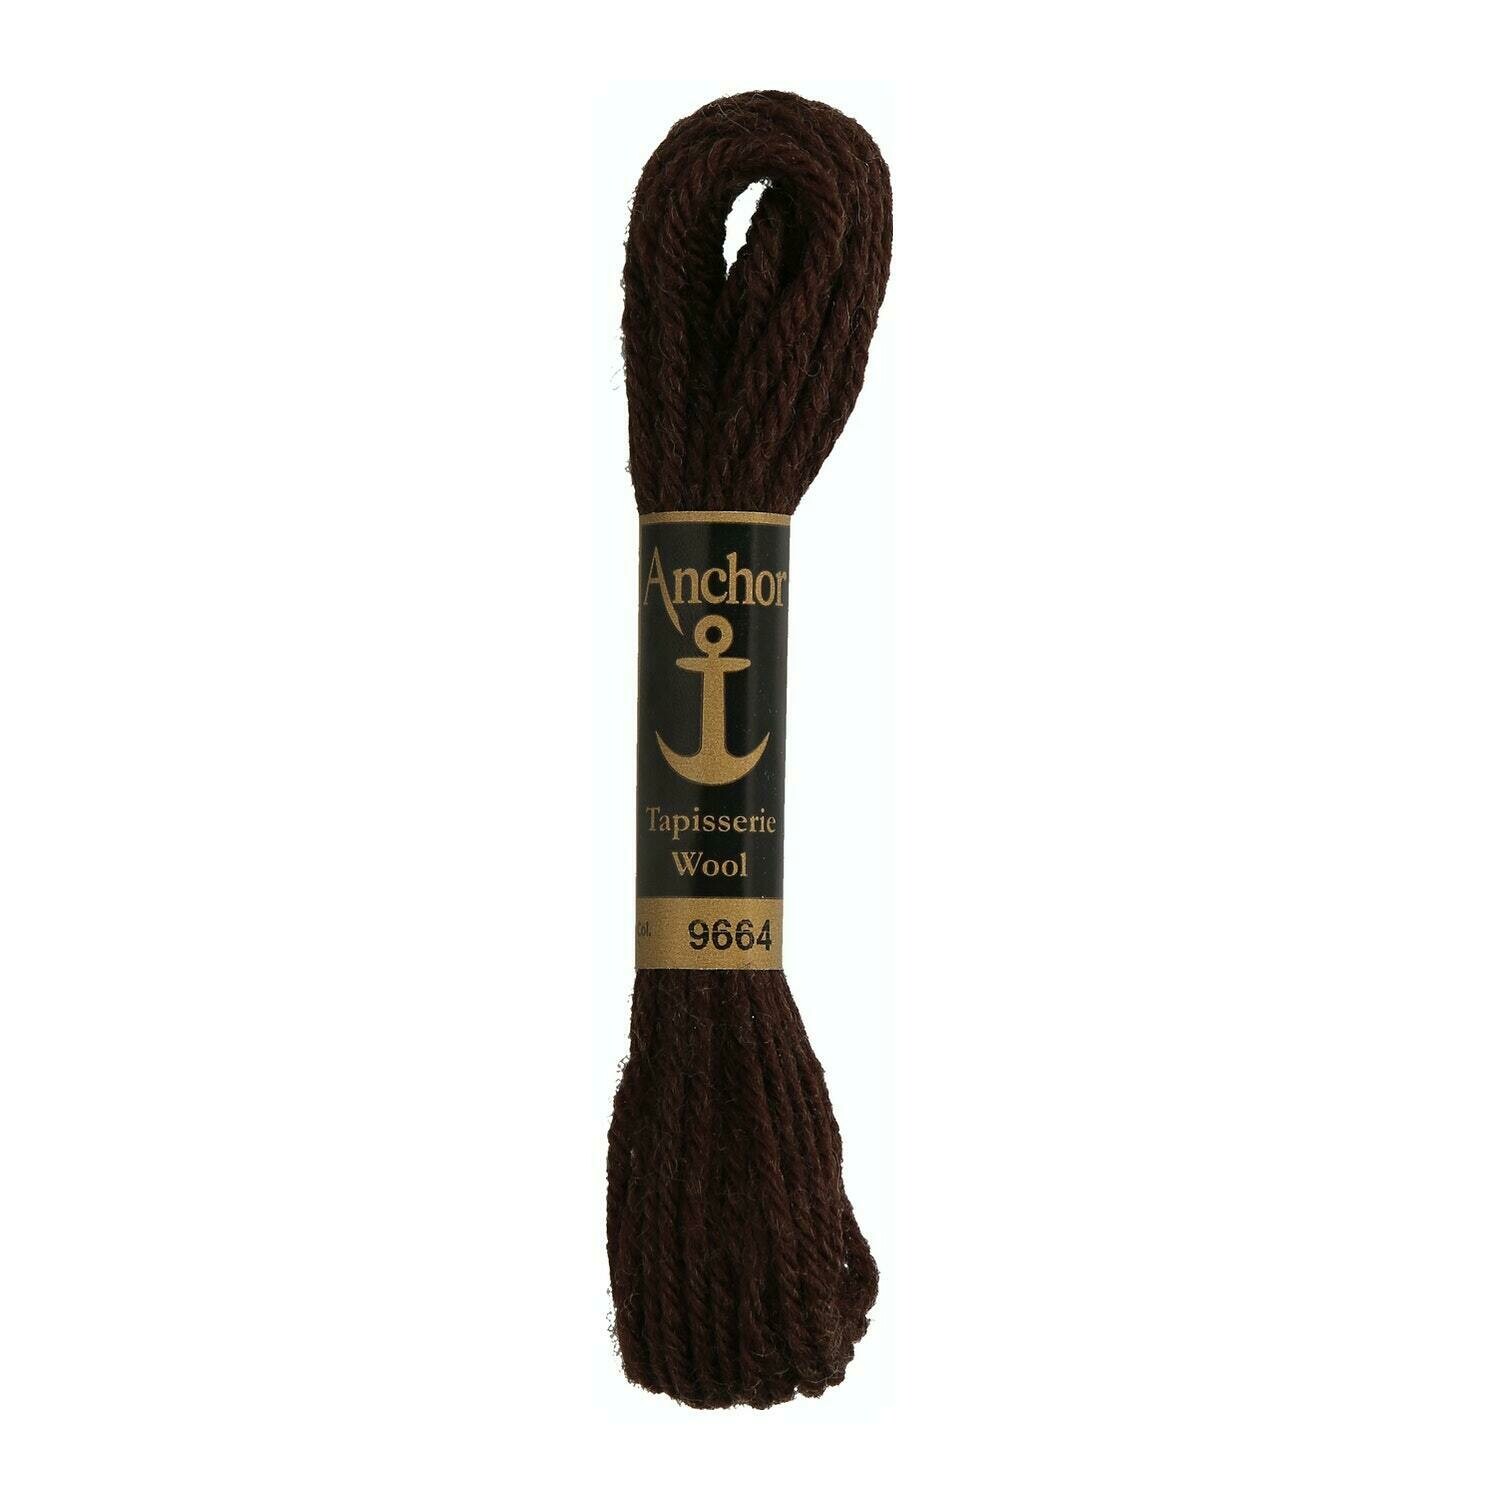 Anchor Tapisserie Wool #09664